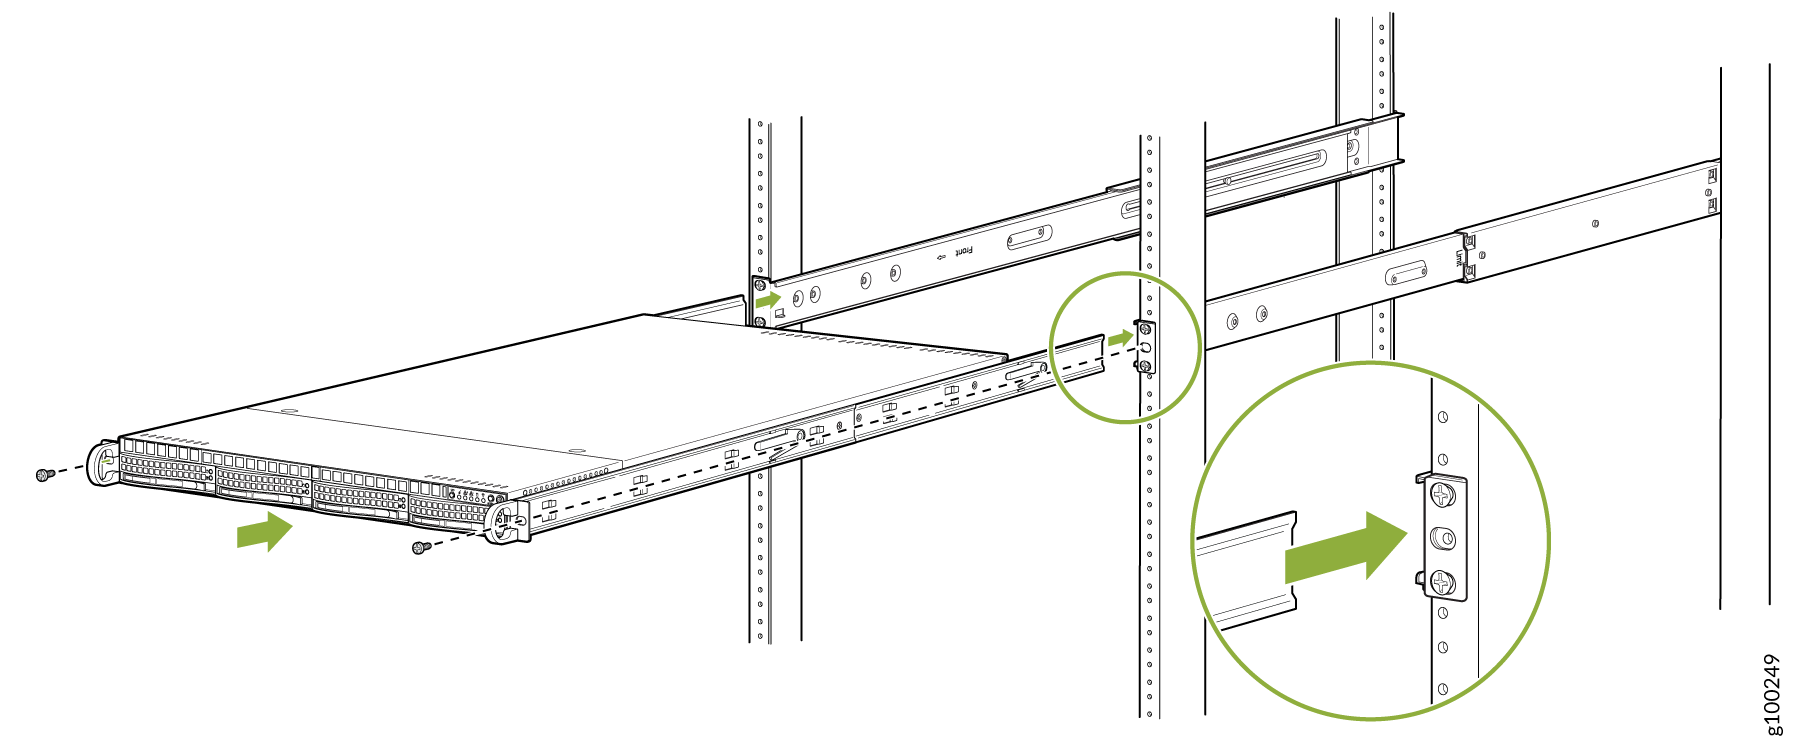 Aligning the Chassis Rails with the Ball-Bearing Shuttle